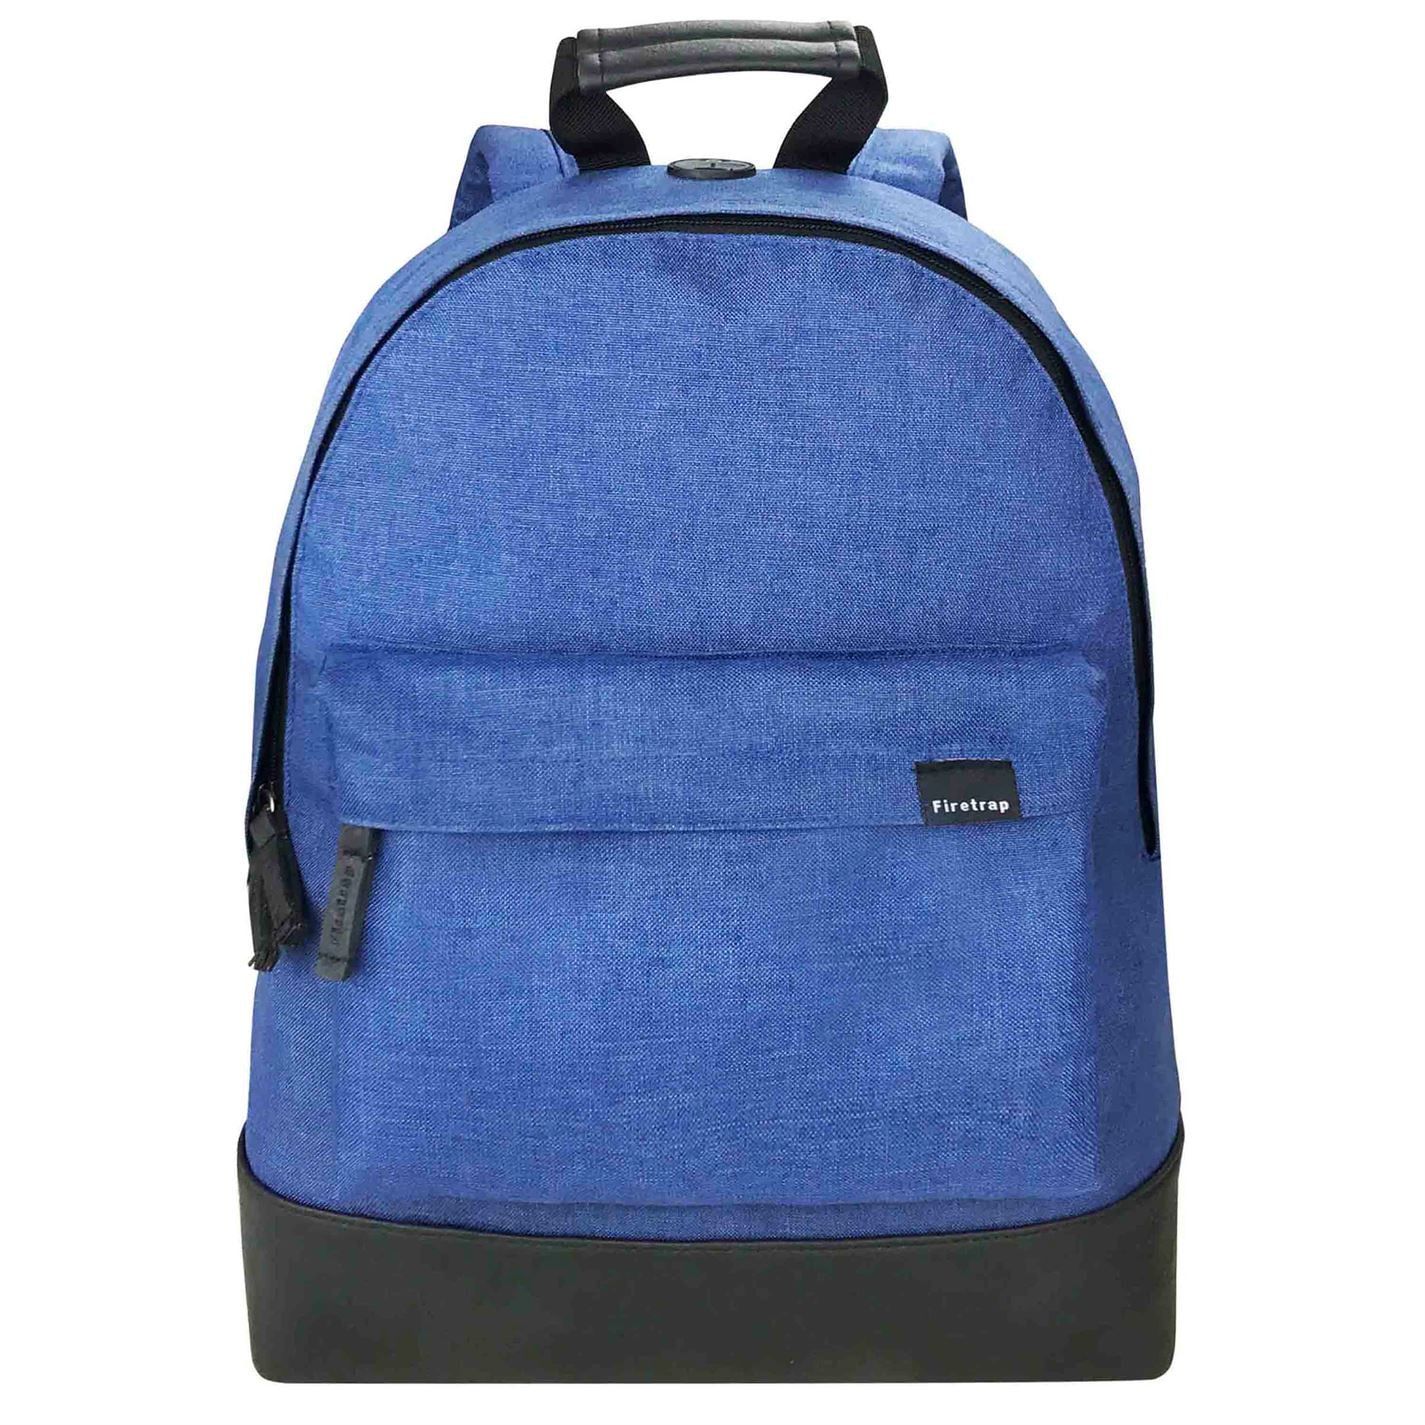 <strong>Firetrap Classic Backpack</strong><br><br> The <Strong>Firetrap Classic Backpack</strong> is perfect for everyday use with a large main zipped compartment that is perfect for all your essentials on the go! This <Strong>backpack</strong> has two padded and adjustable shoulder straps for added comfort complete with an outer zipped pocket and the Firetrap logo.<br>> This product may have slight cosmetic differences from the image shown due to assorted colours or updated seasonal collections<br>> <strong>Backpack</strong><br>> Zipped fastenings<br>> Padded shoulder straps<br>> Adjustable<br>> Carry handle<br>> Padded back<br>> Front zipped pockets<br>> Firetrap logo<br>> H42 x W30 x D10cm<br>> Wipe clean with a damp cloth